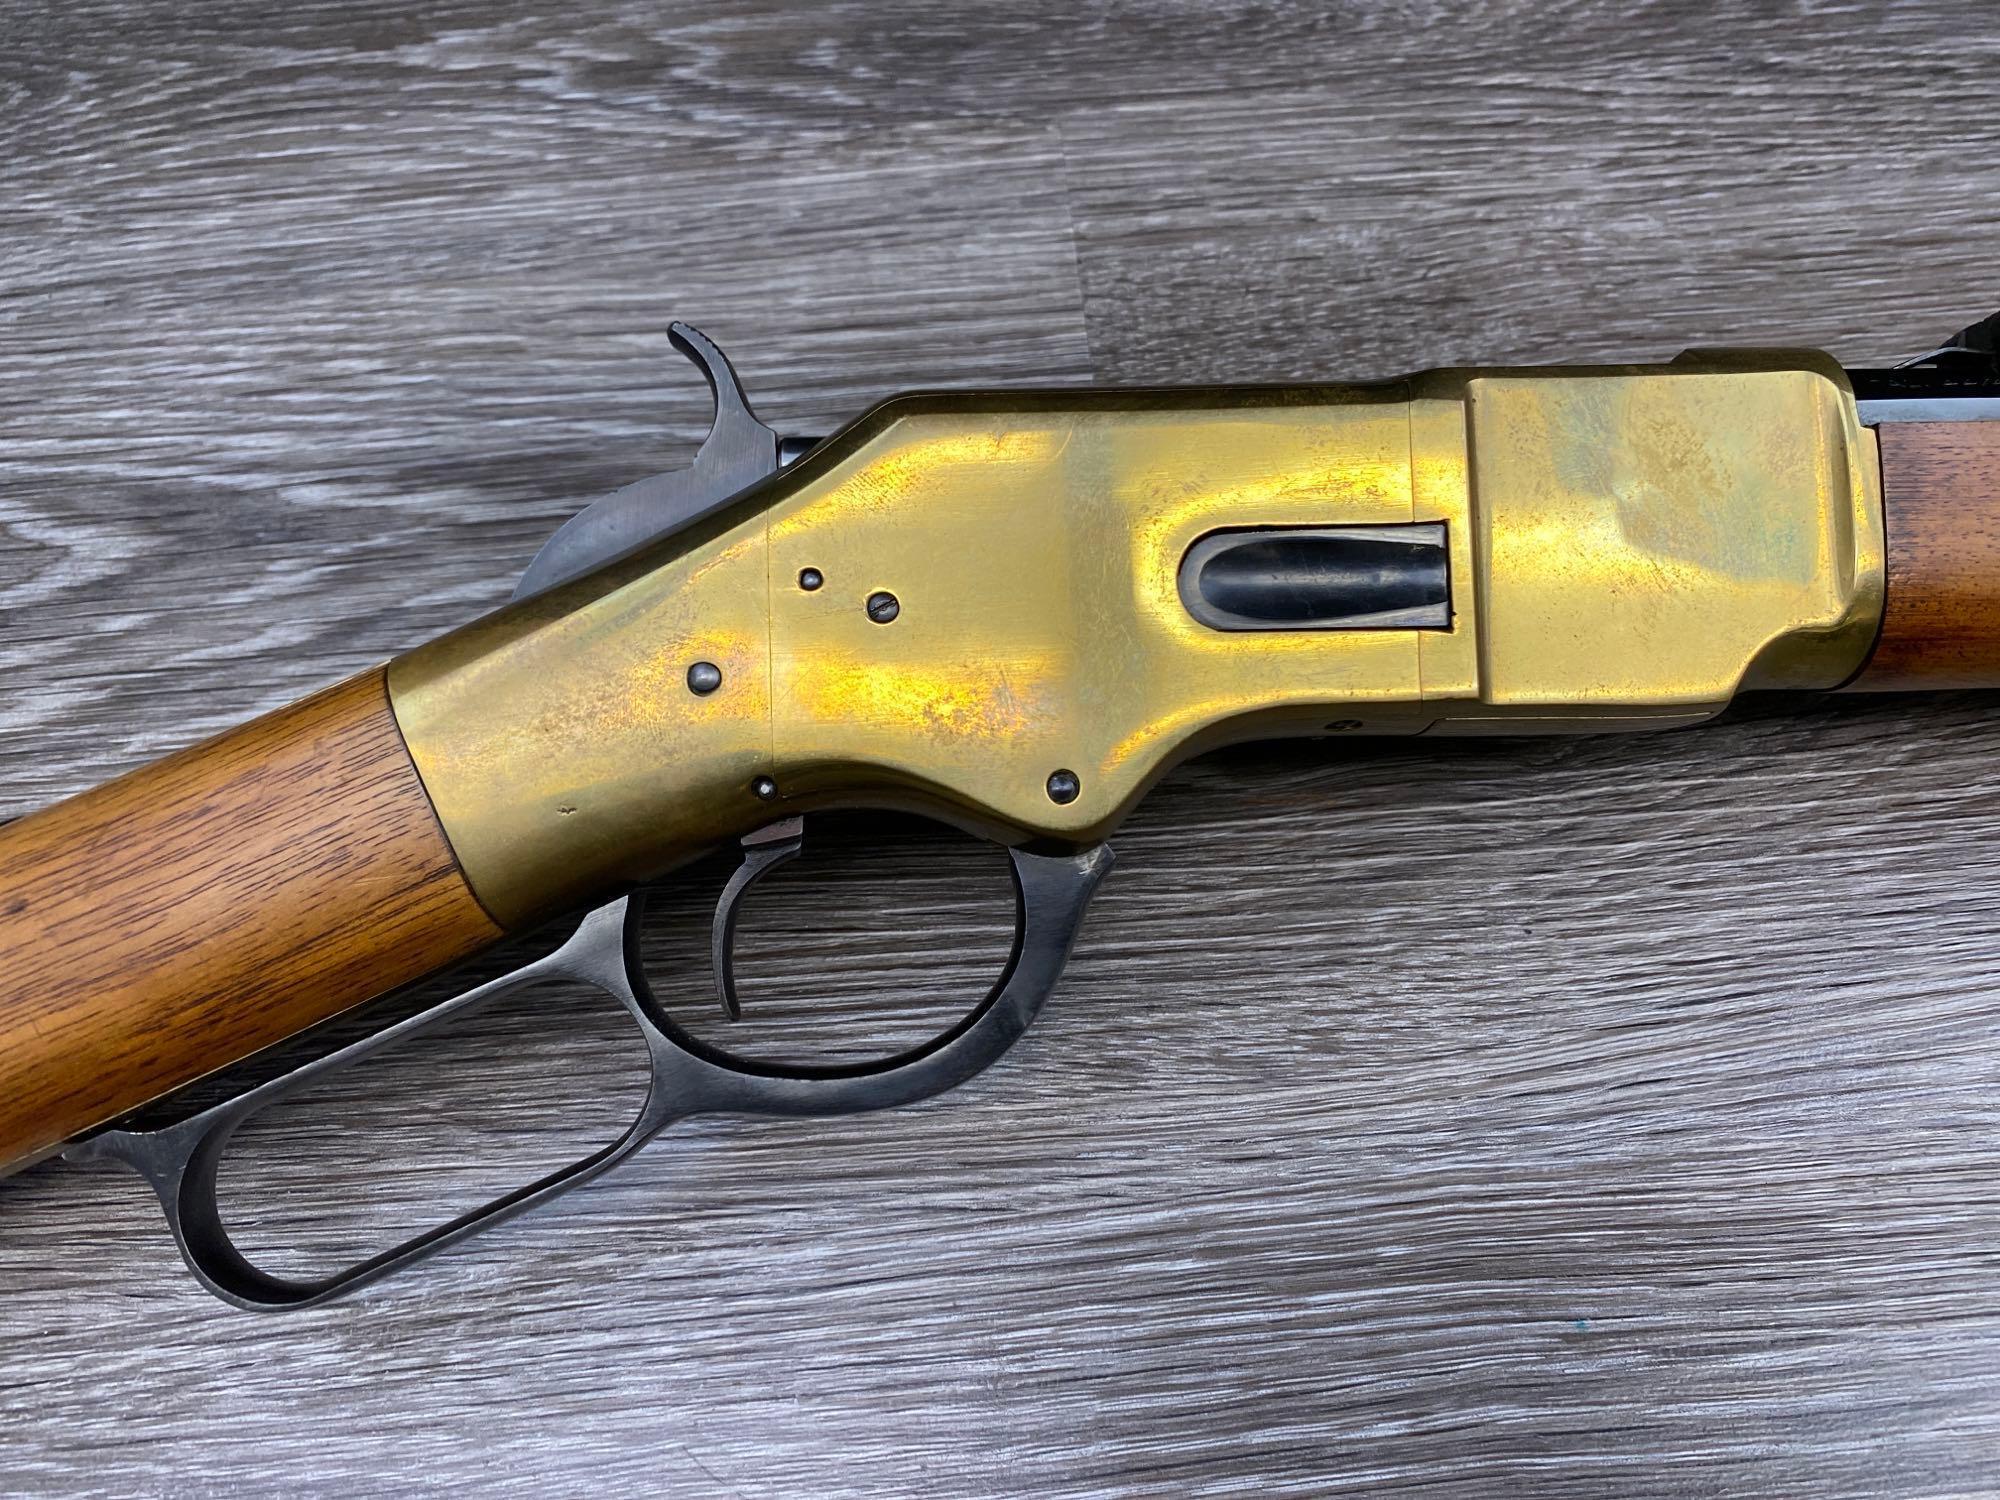 ITALIAN-MADE FOR NAVY ARMS MODEL 66 LEVER ACTION SPORTING RIFLE .44-40 CAL.